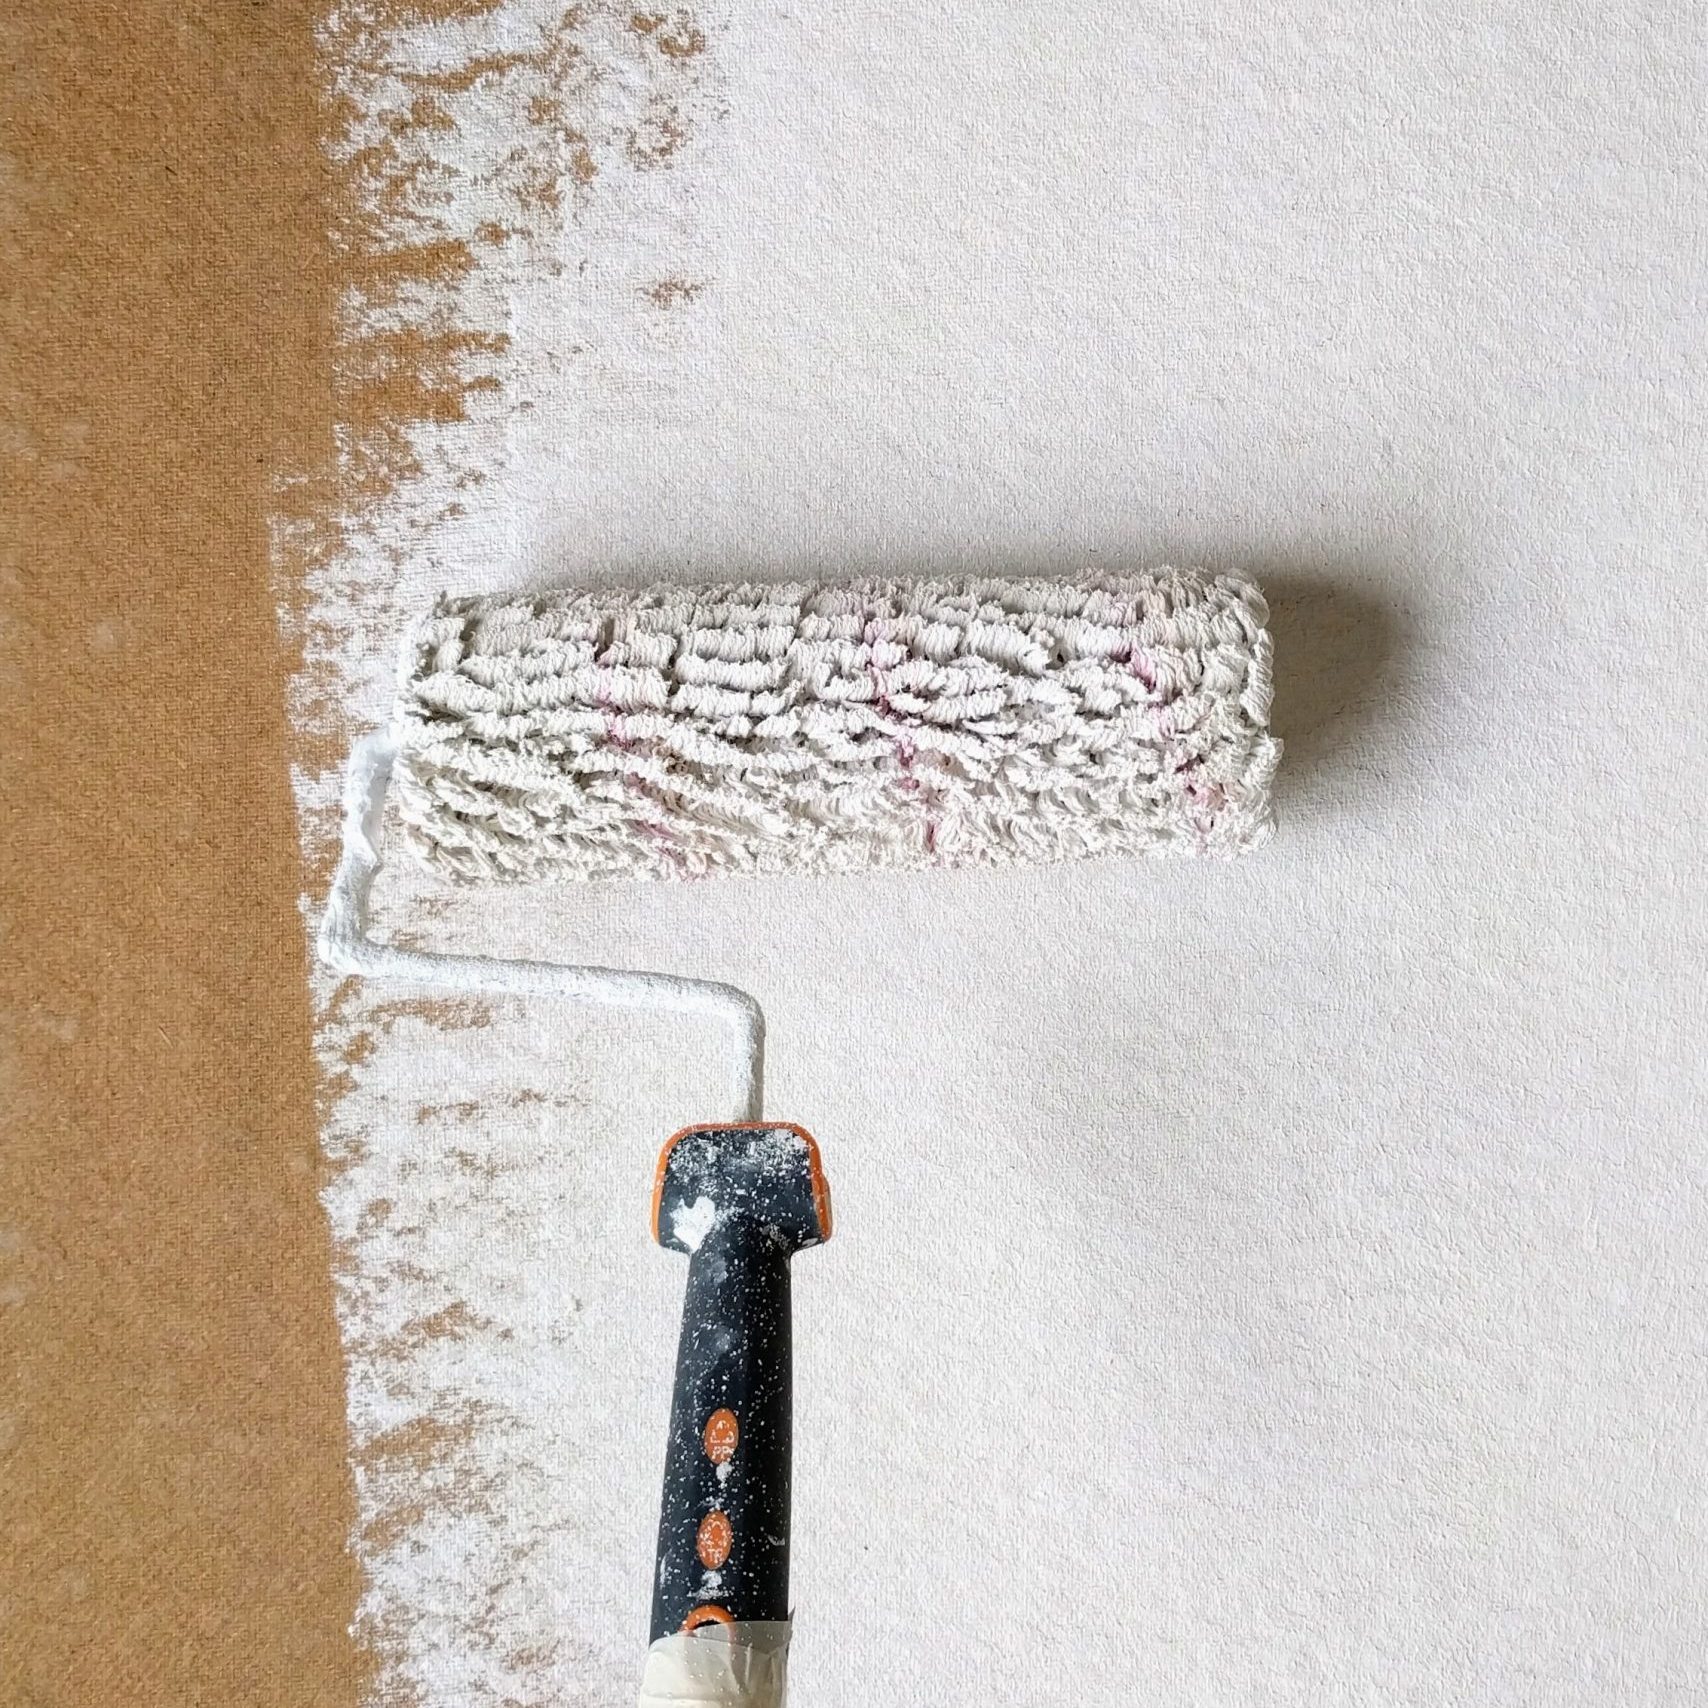 How to Paint with a Roller